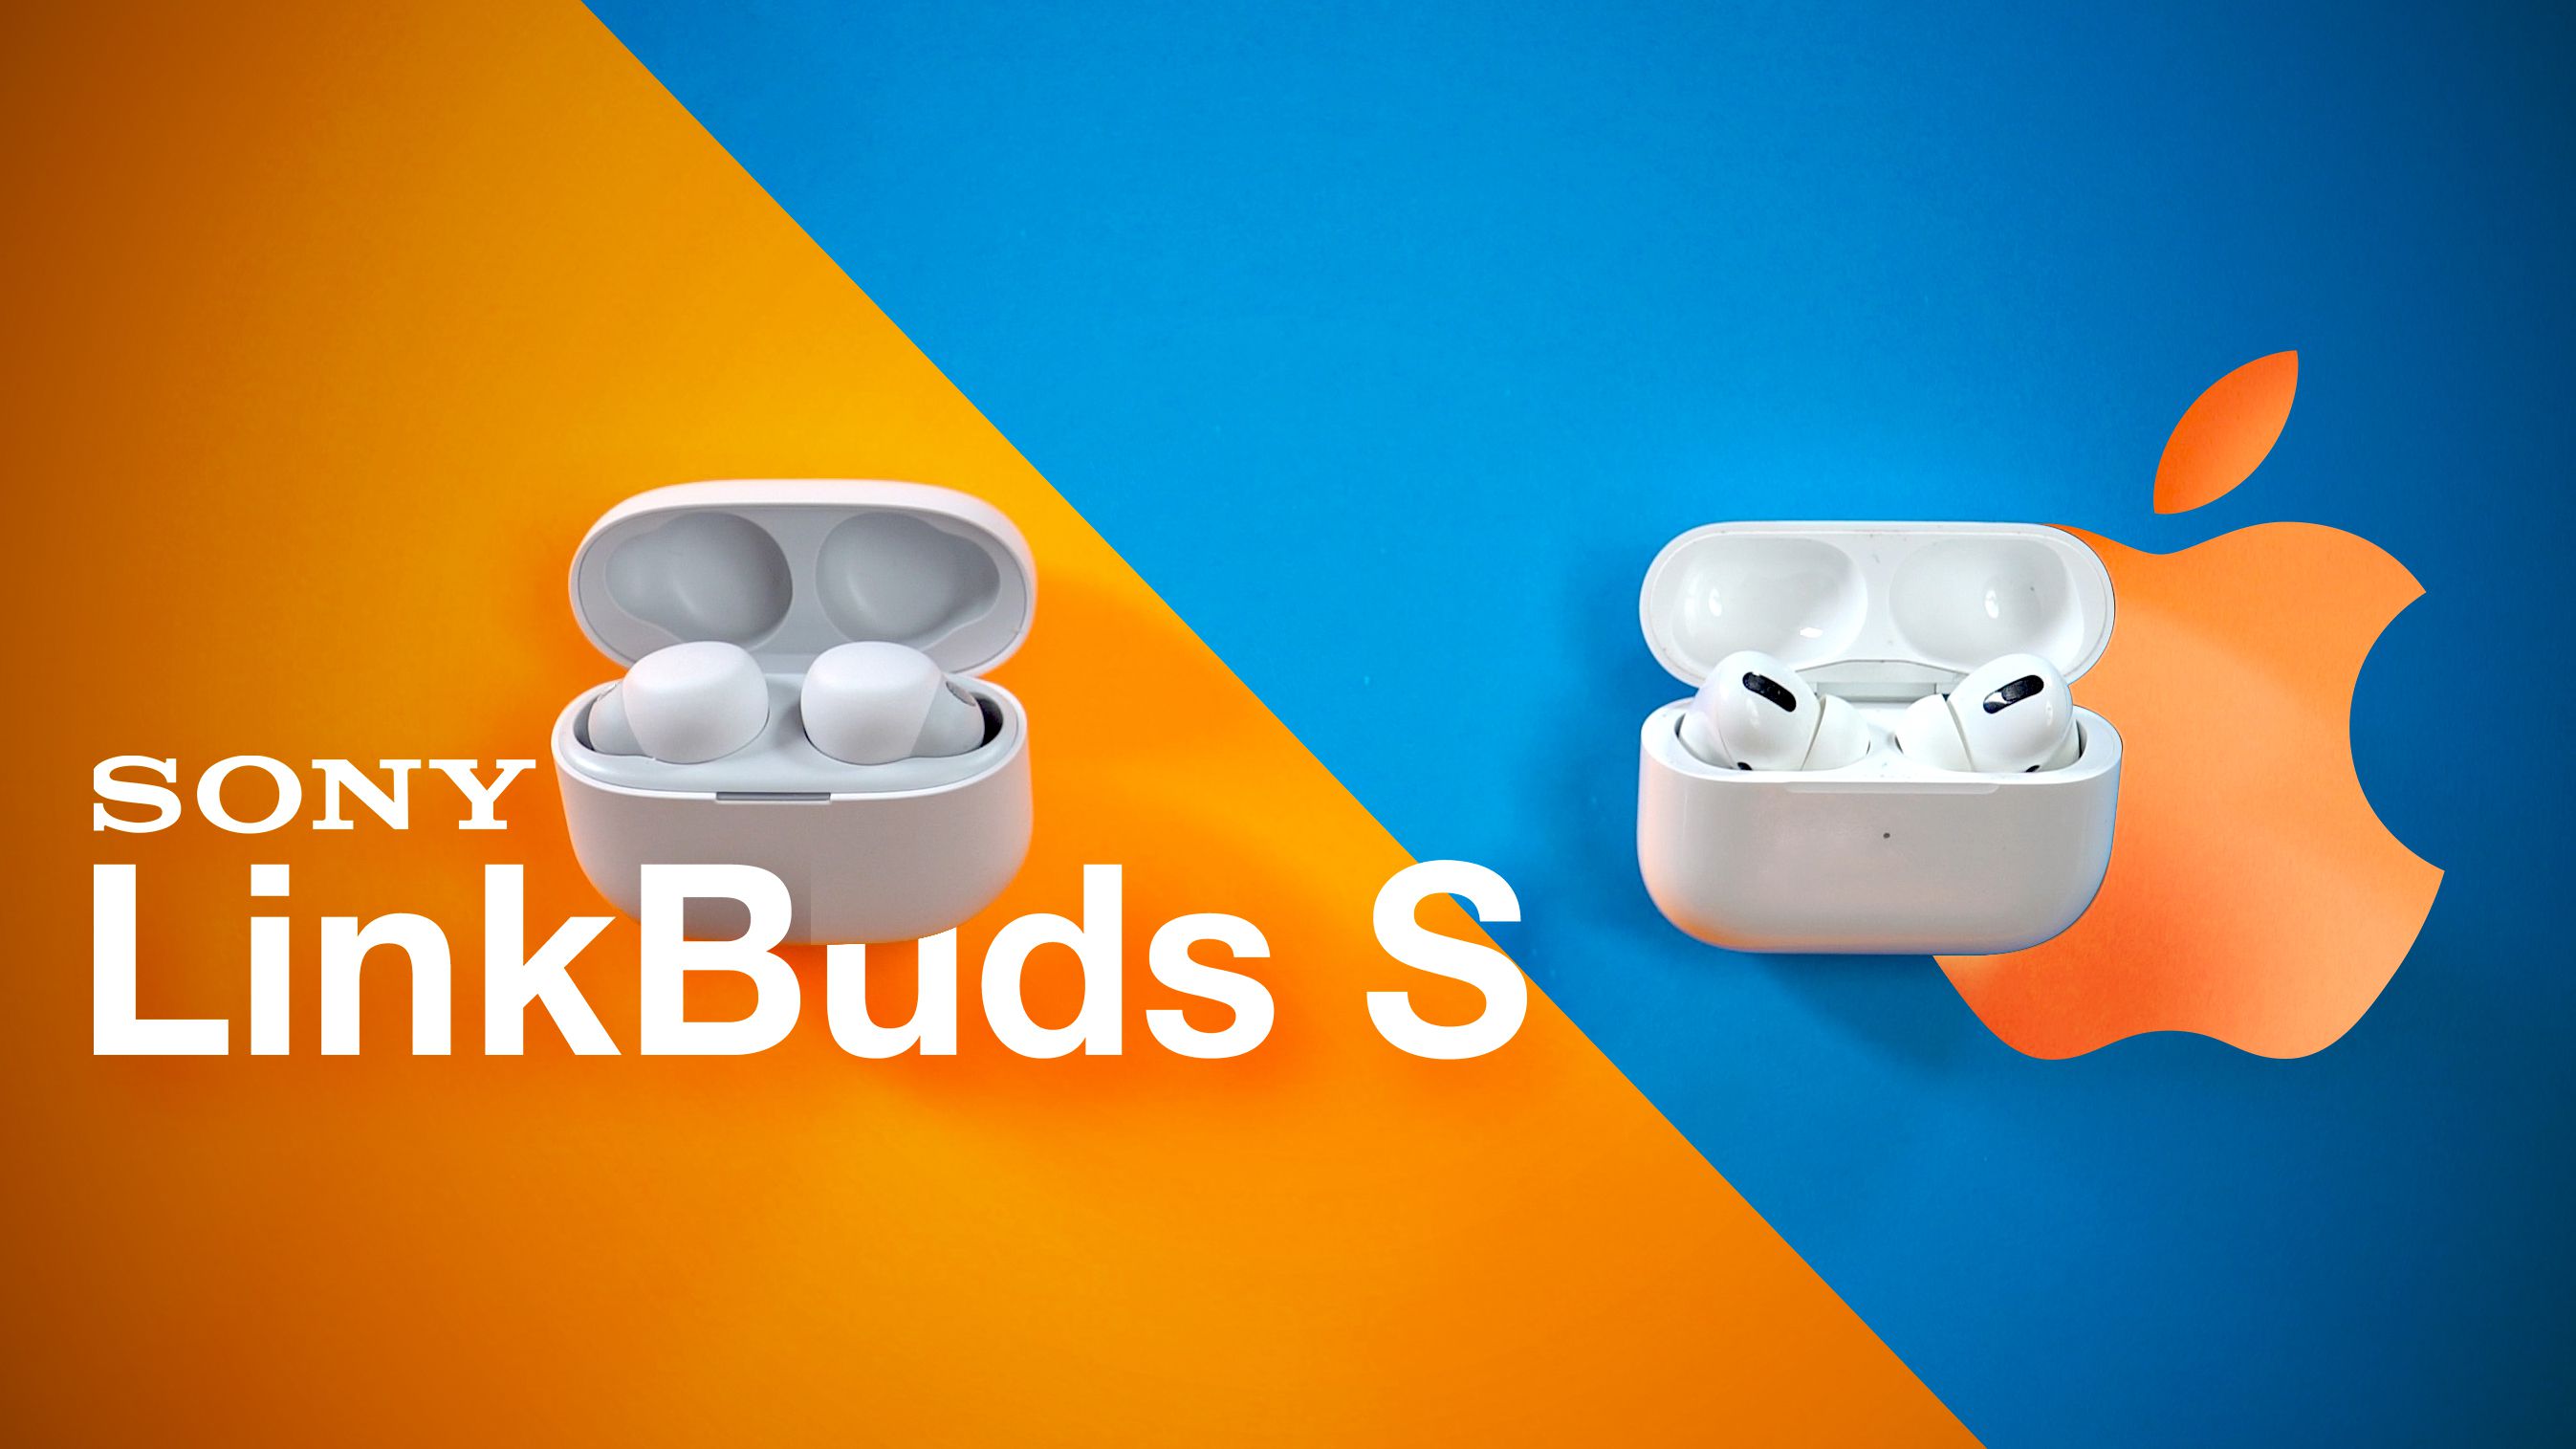 Apple's AirPods Pro vs. Sony's LinkBuds S Earbuds